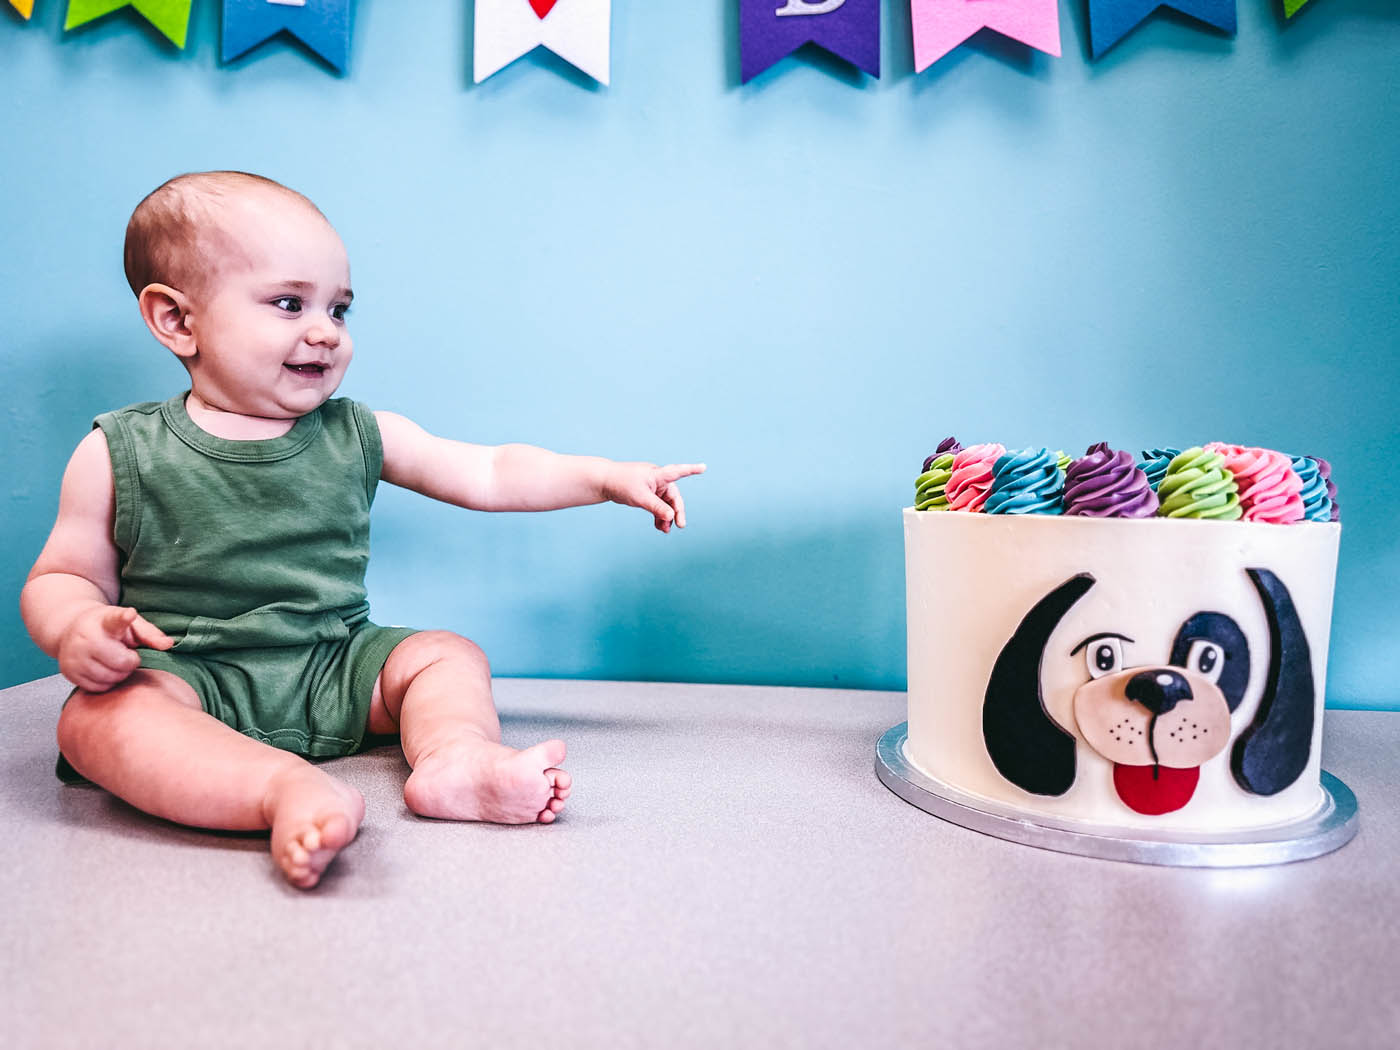 A little baby boy sitting next to a Rompy cake, book a birthday party in Midlothian, VA!